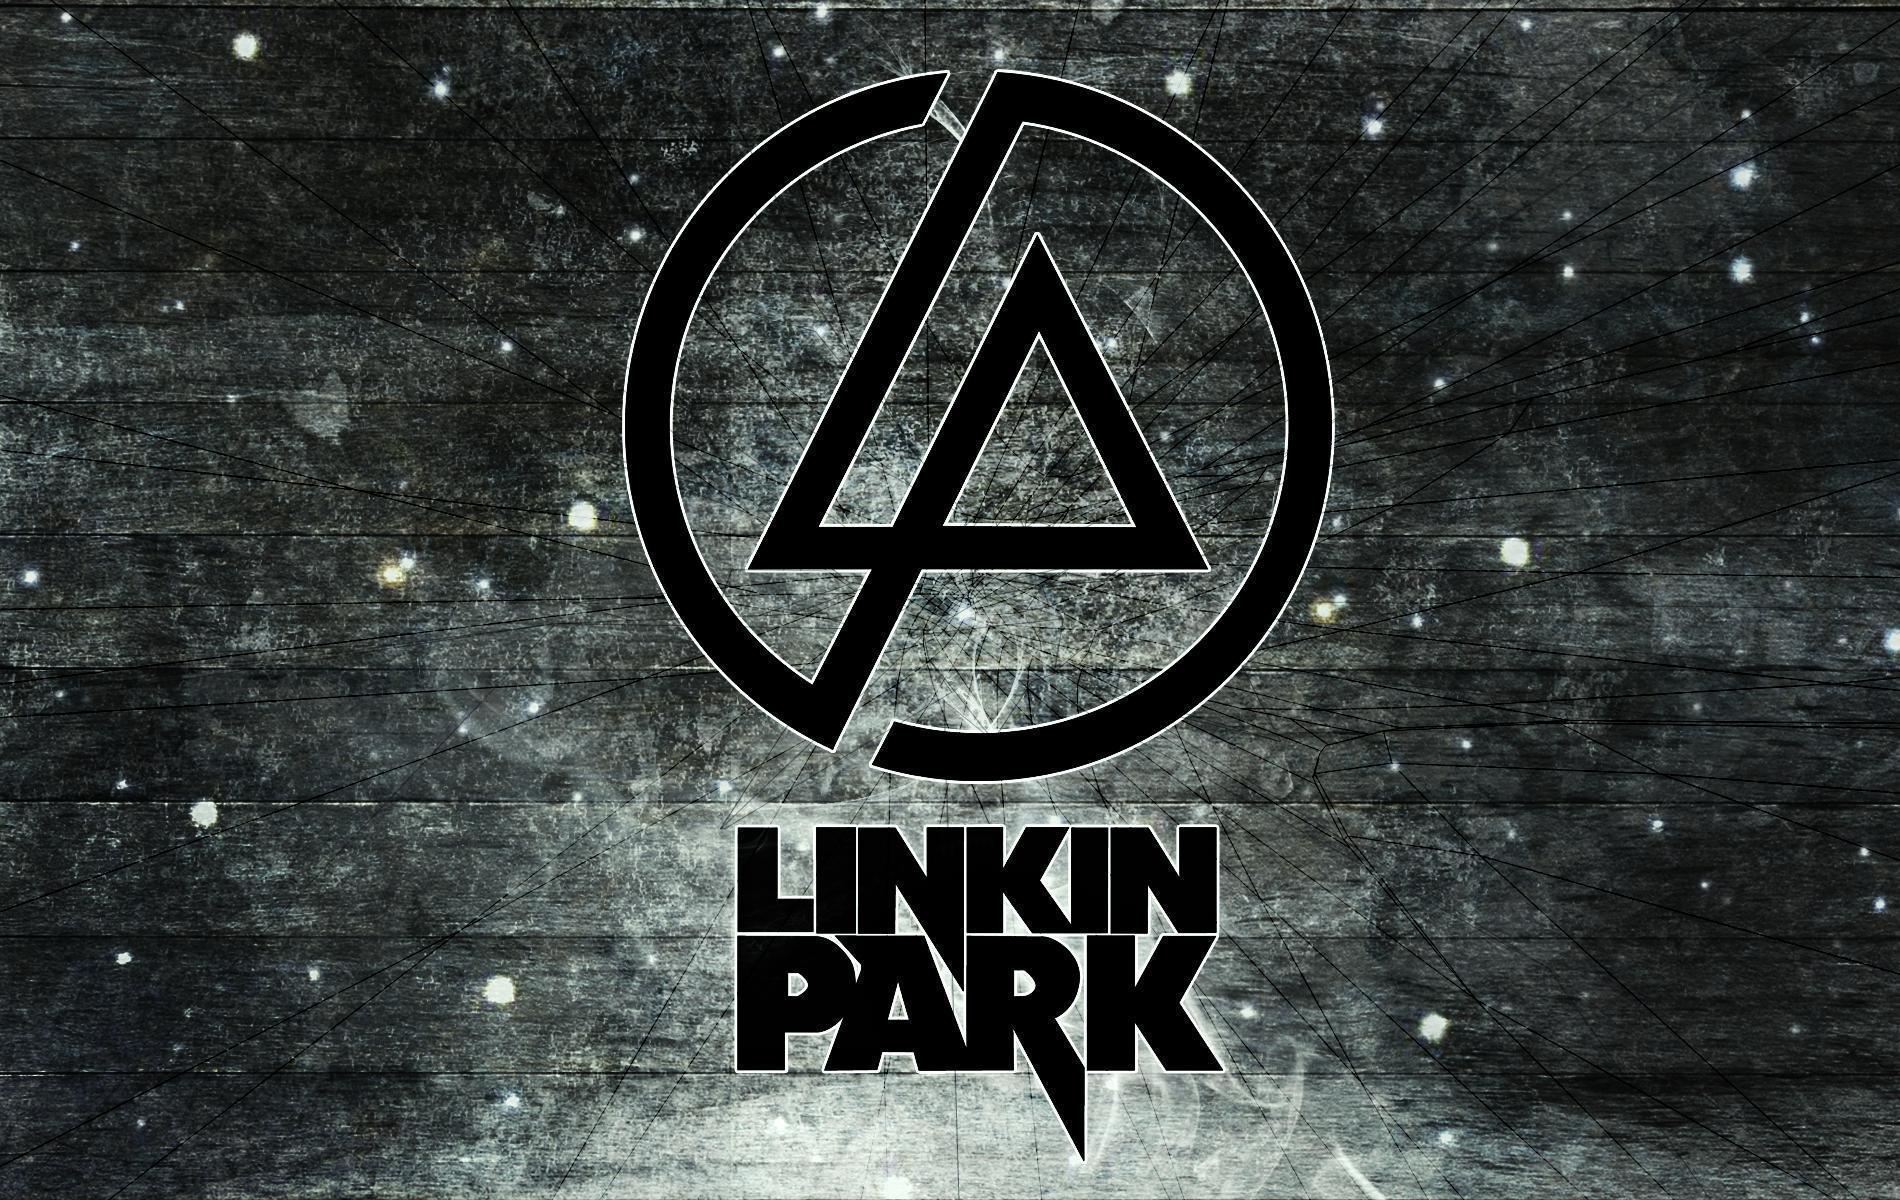 Linkin Park Logo Grupos Musicales Wallpapers 1024x768 px Free